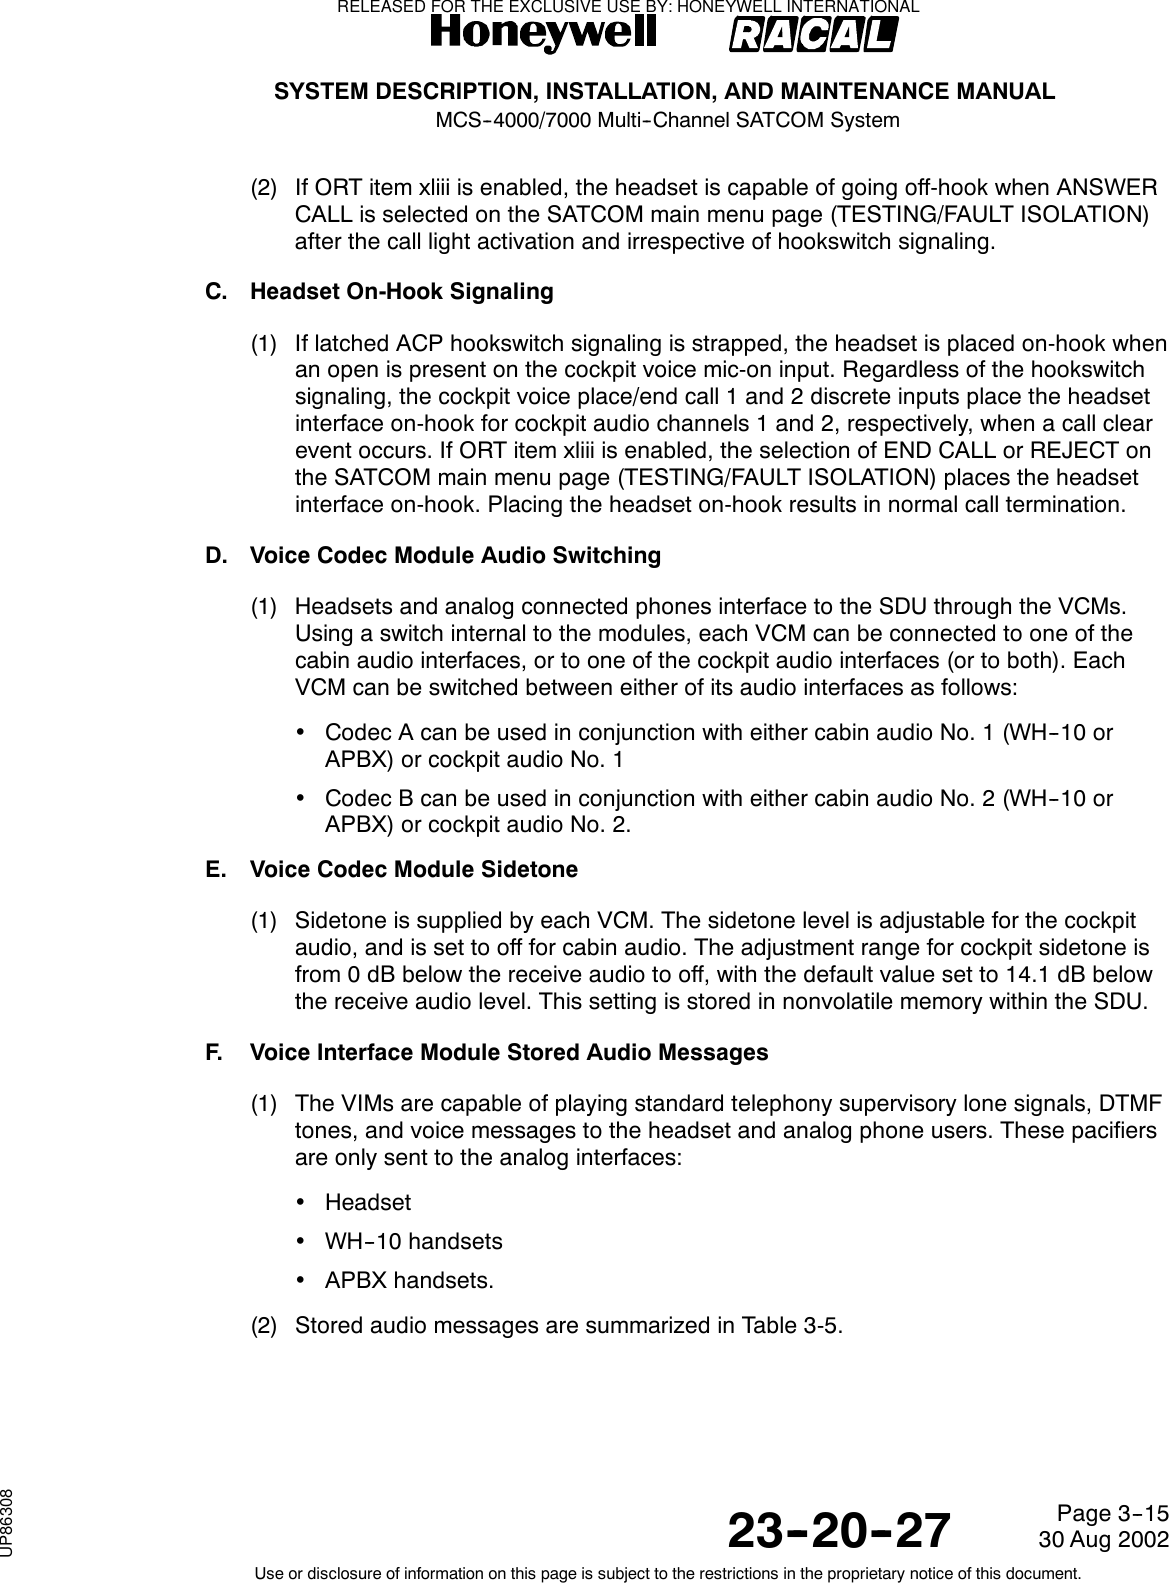 SYSTEM DESCRIPTION, INSTALLATION, AND MAINTENANCE MANUALMCS--4000/7000 Multi--Channel SATCOM System23--20--2730 Aug 2002Use or disclosure of information on this page is subject to the restrictions in the proprietary notice of this document.Page 3--15(2) If ORT item xliii is enabled, the headset is capable of going off-hook when ANSWERCALL is selected on the SATCOM main menu page (TESTING/FAULT ISOLATION)after the call light activation and irrespective of hookswitch signaling.C. Headset On-Hook Signaling(1) If latched ACP hookswitch signaling is strapped, the headset is placed on-hook whenan open is present on the cockpit voice mic-on input. Regardless of the hookswitchsignaling, the cockpit voice place/end call 1 and 2 discrete inputs place the headsetinterface on-hook for cockpit audio channels 1 and 2, respectively, when a call clearevent occurs. If ORT item xliii is enabled, the selection of END CALL or REJECT onthe SATCOM main menu page (TESTING/FAULT ISOLATION) places the headsetinterface on-hook. Placing the headset on-hook results in normal call termination.D. Voice Codec Module Audio Switching(1) Headsets and analog connected phones interface to the SDU through the VCMs.Using a switch internal to the modules, each VCM can be connected to one of thecabin audio interfaces, or to one of the cockpit audio interfaces (or to both). EachVCM can be switched between either of its audio interfaces as follows:•CodecAcanbeusedinconjunctionwitheithercabinaudioNo.1(WH--10orAPBX) or cockpit audio No. 1•CodecBcanbeusedinconjunctionwitheithercabinaudioNo.2(WH--10orAPBX) or cockpit audio No. 2.E. Voice Codec Module Sidetone(1) Sidetone is supplied by each VCM. The sidetone level is adjustable for the cockpitaudio, and is set to off for cabin audio. The adjustment range for cockpit sidetone isfrom 0 dB below the receive audio to off, with the default value set to 14.1 dB belowthe receive audio level. This setting is stored in nonvolatile memory within the SDU.F. Voice Interface Module Stored Audio Messages(1) The VIMs are capable of playing standard telephony supervisory lone signals, DTMFtones, and voice messages to the headset and analog phone users. These pacifiersare only sent to the analog interfaces:•Headset•WH--10 handsets•APBX handsets.(2) Stored audio messages are summarized in Table 3-5.RELEASED FOR THE EXCLUSIVE USE BY: HONEYWELL INTERNATIONALUP86308